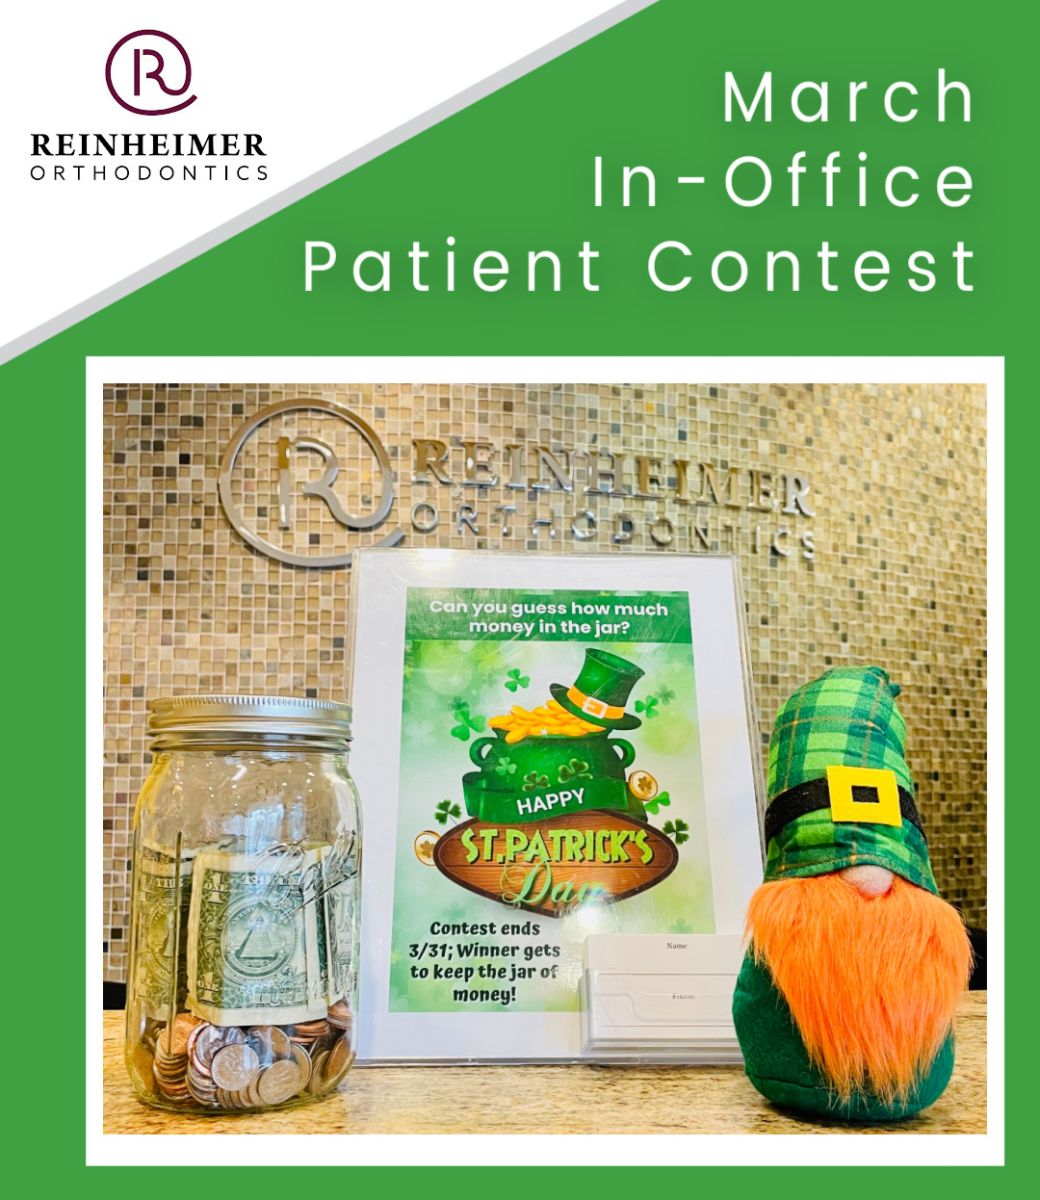 March Contest at Reinheimer Orthodontics in Annapolis, Maryland